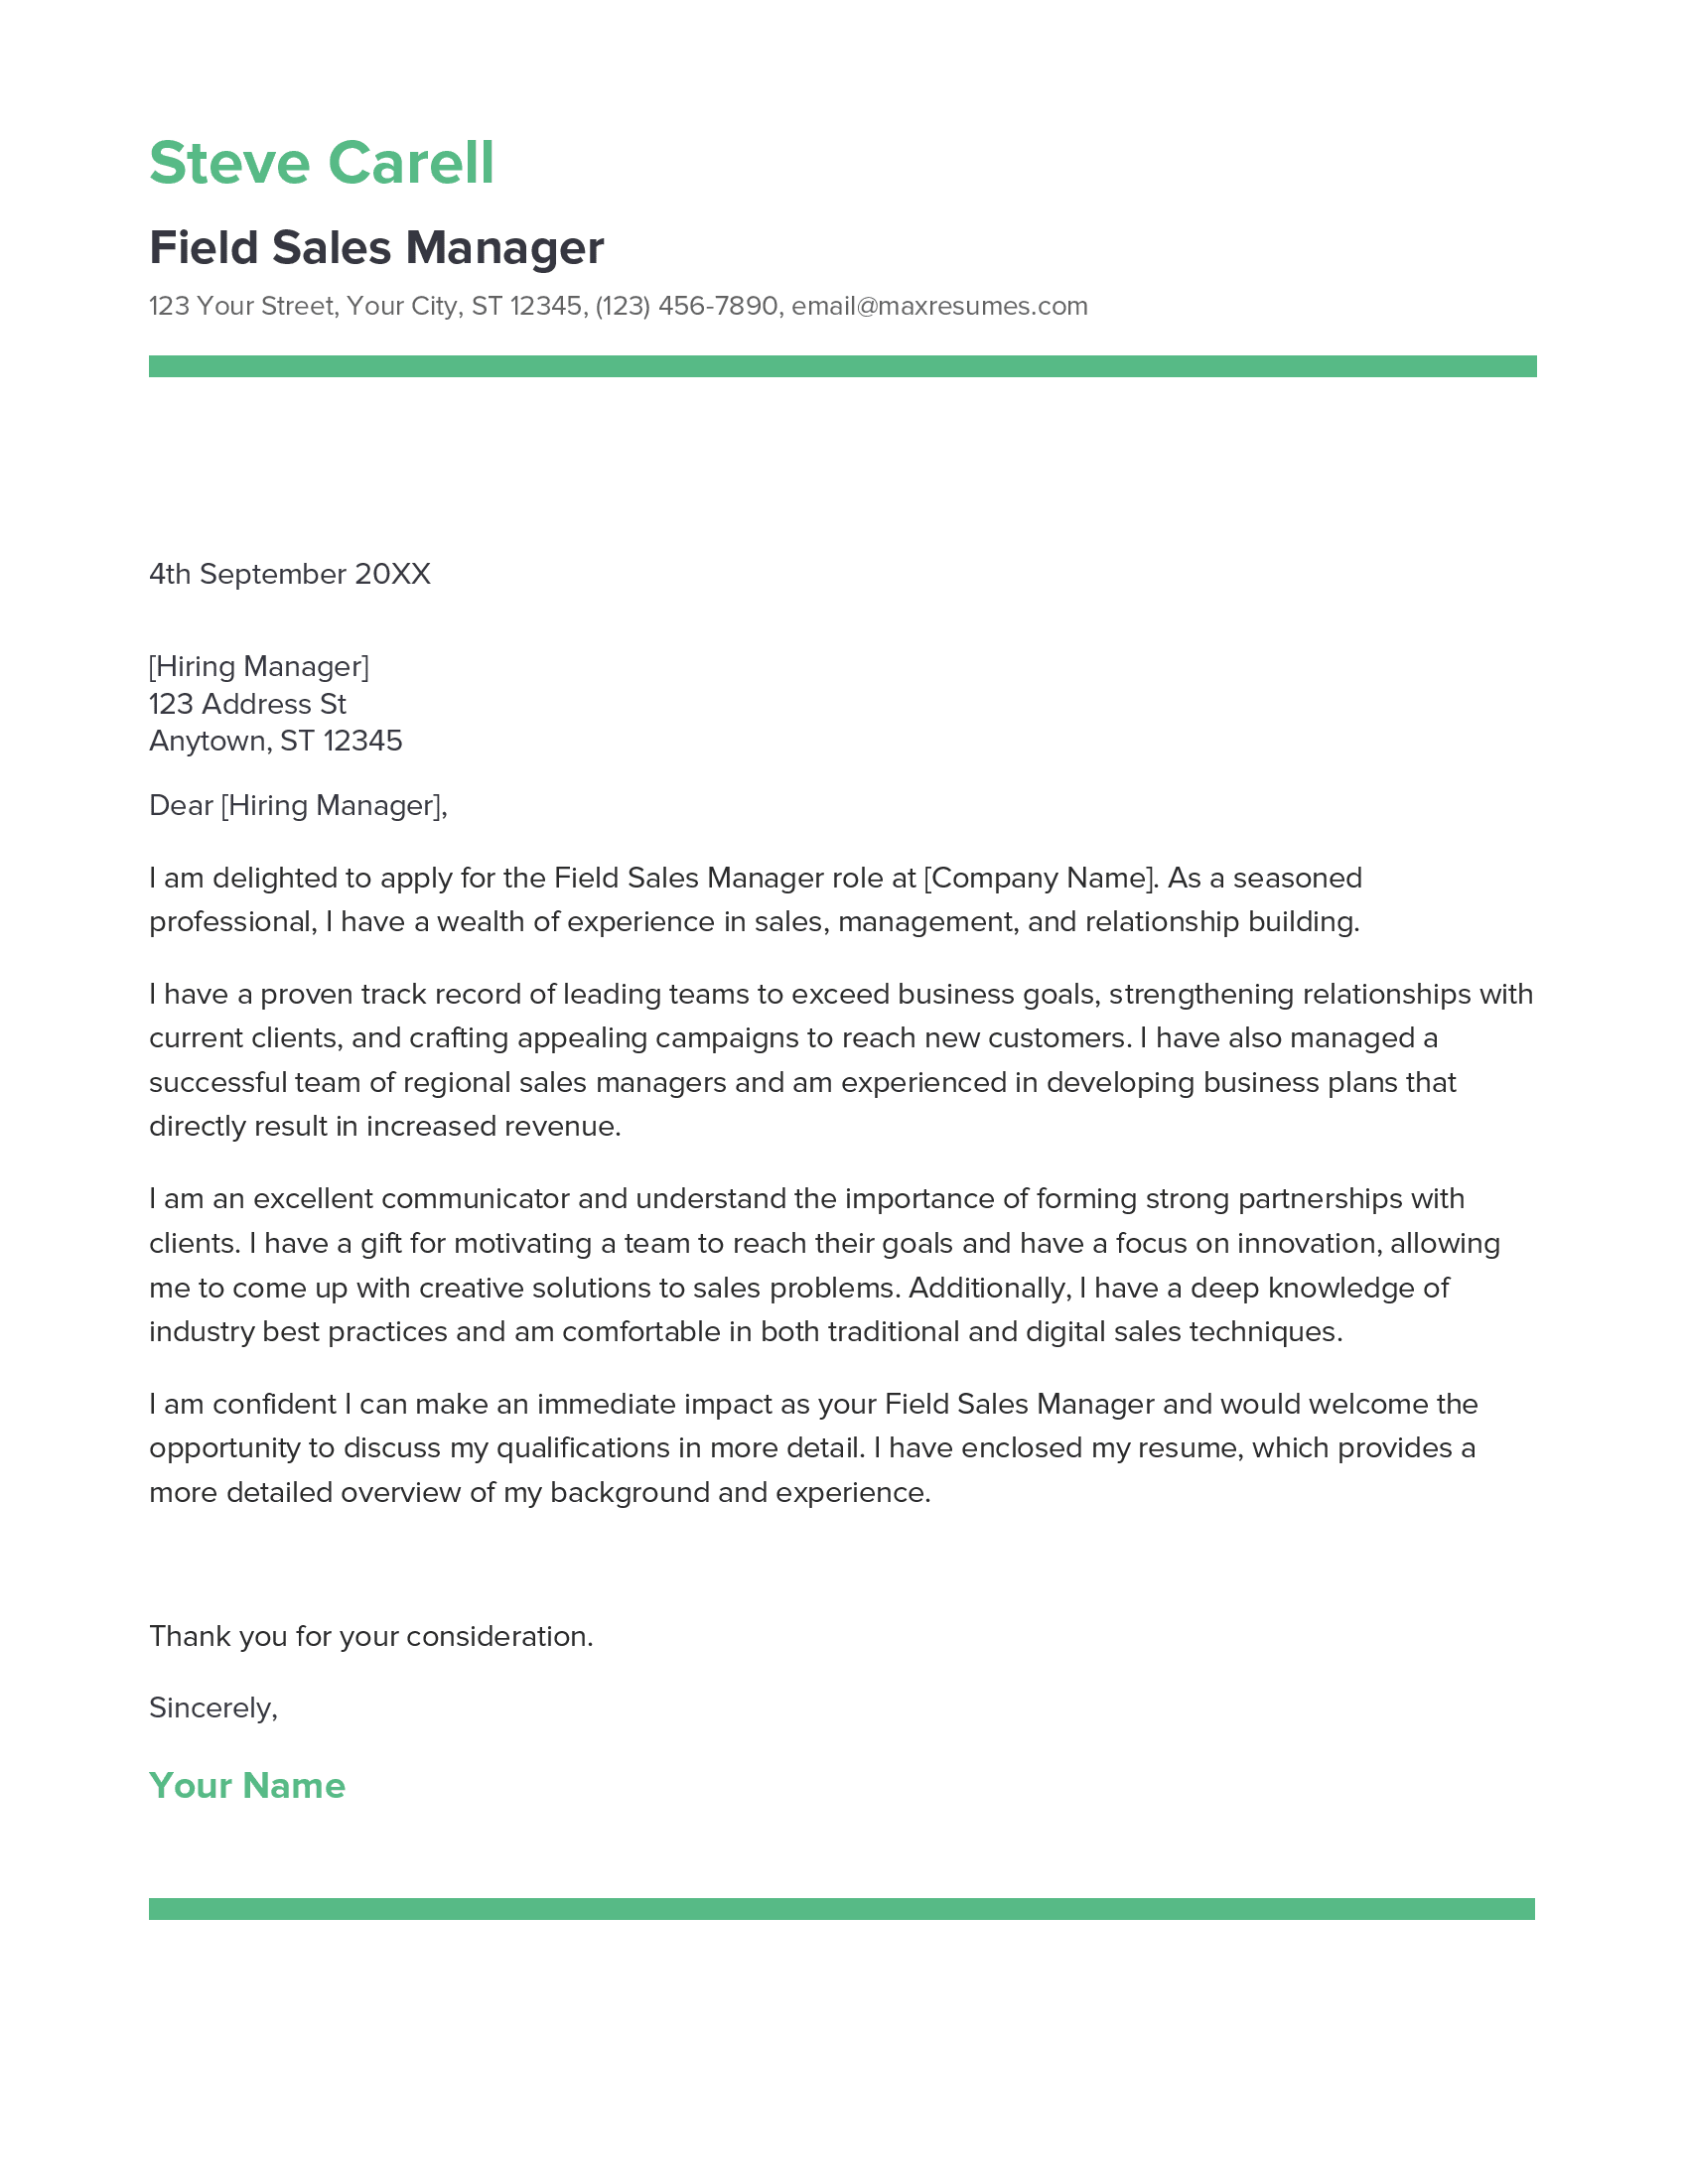 Field Sales Manager Cover Letter Example